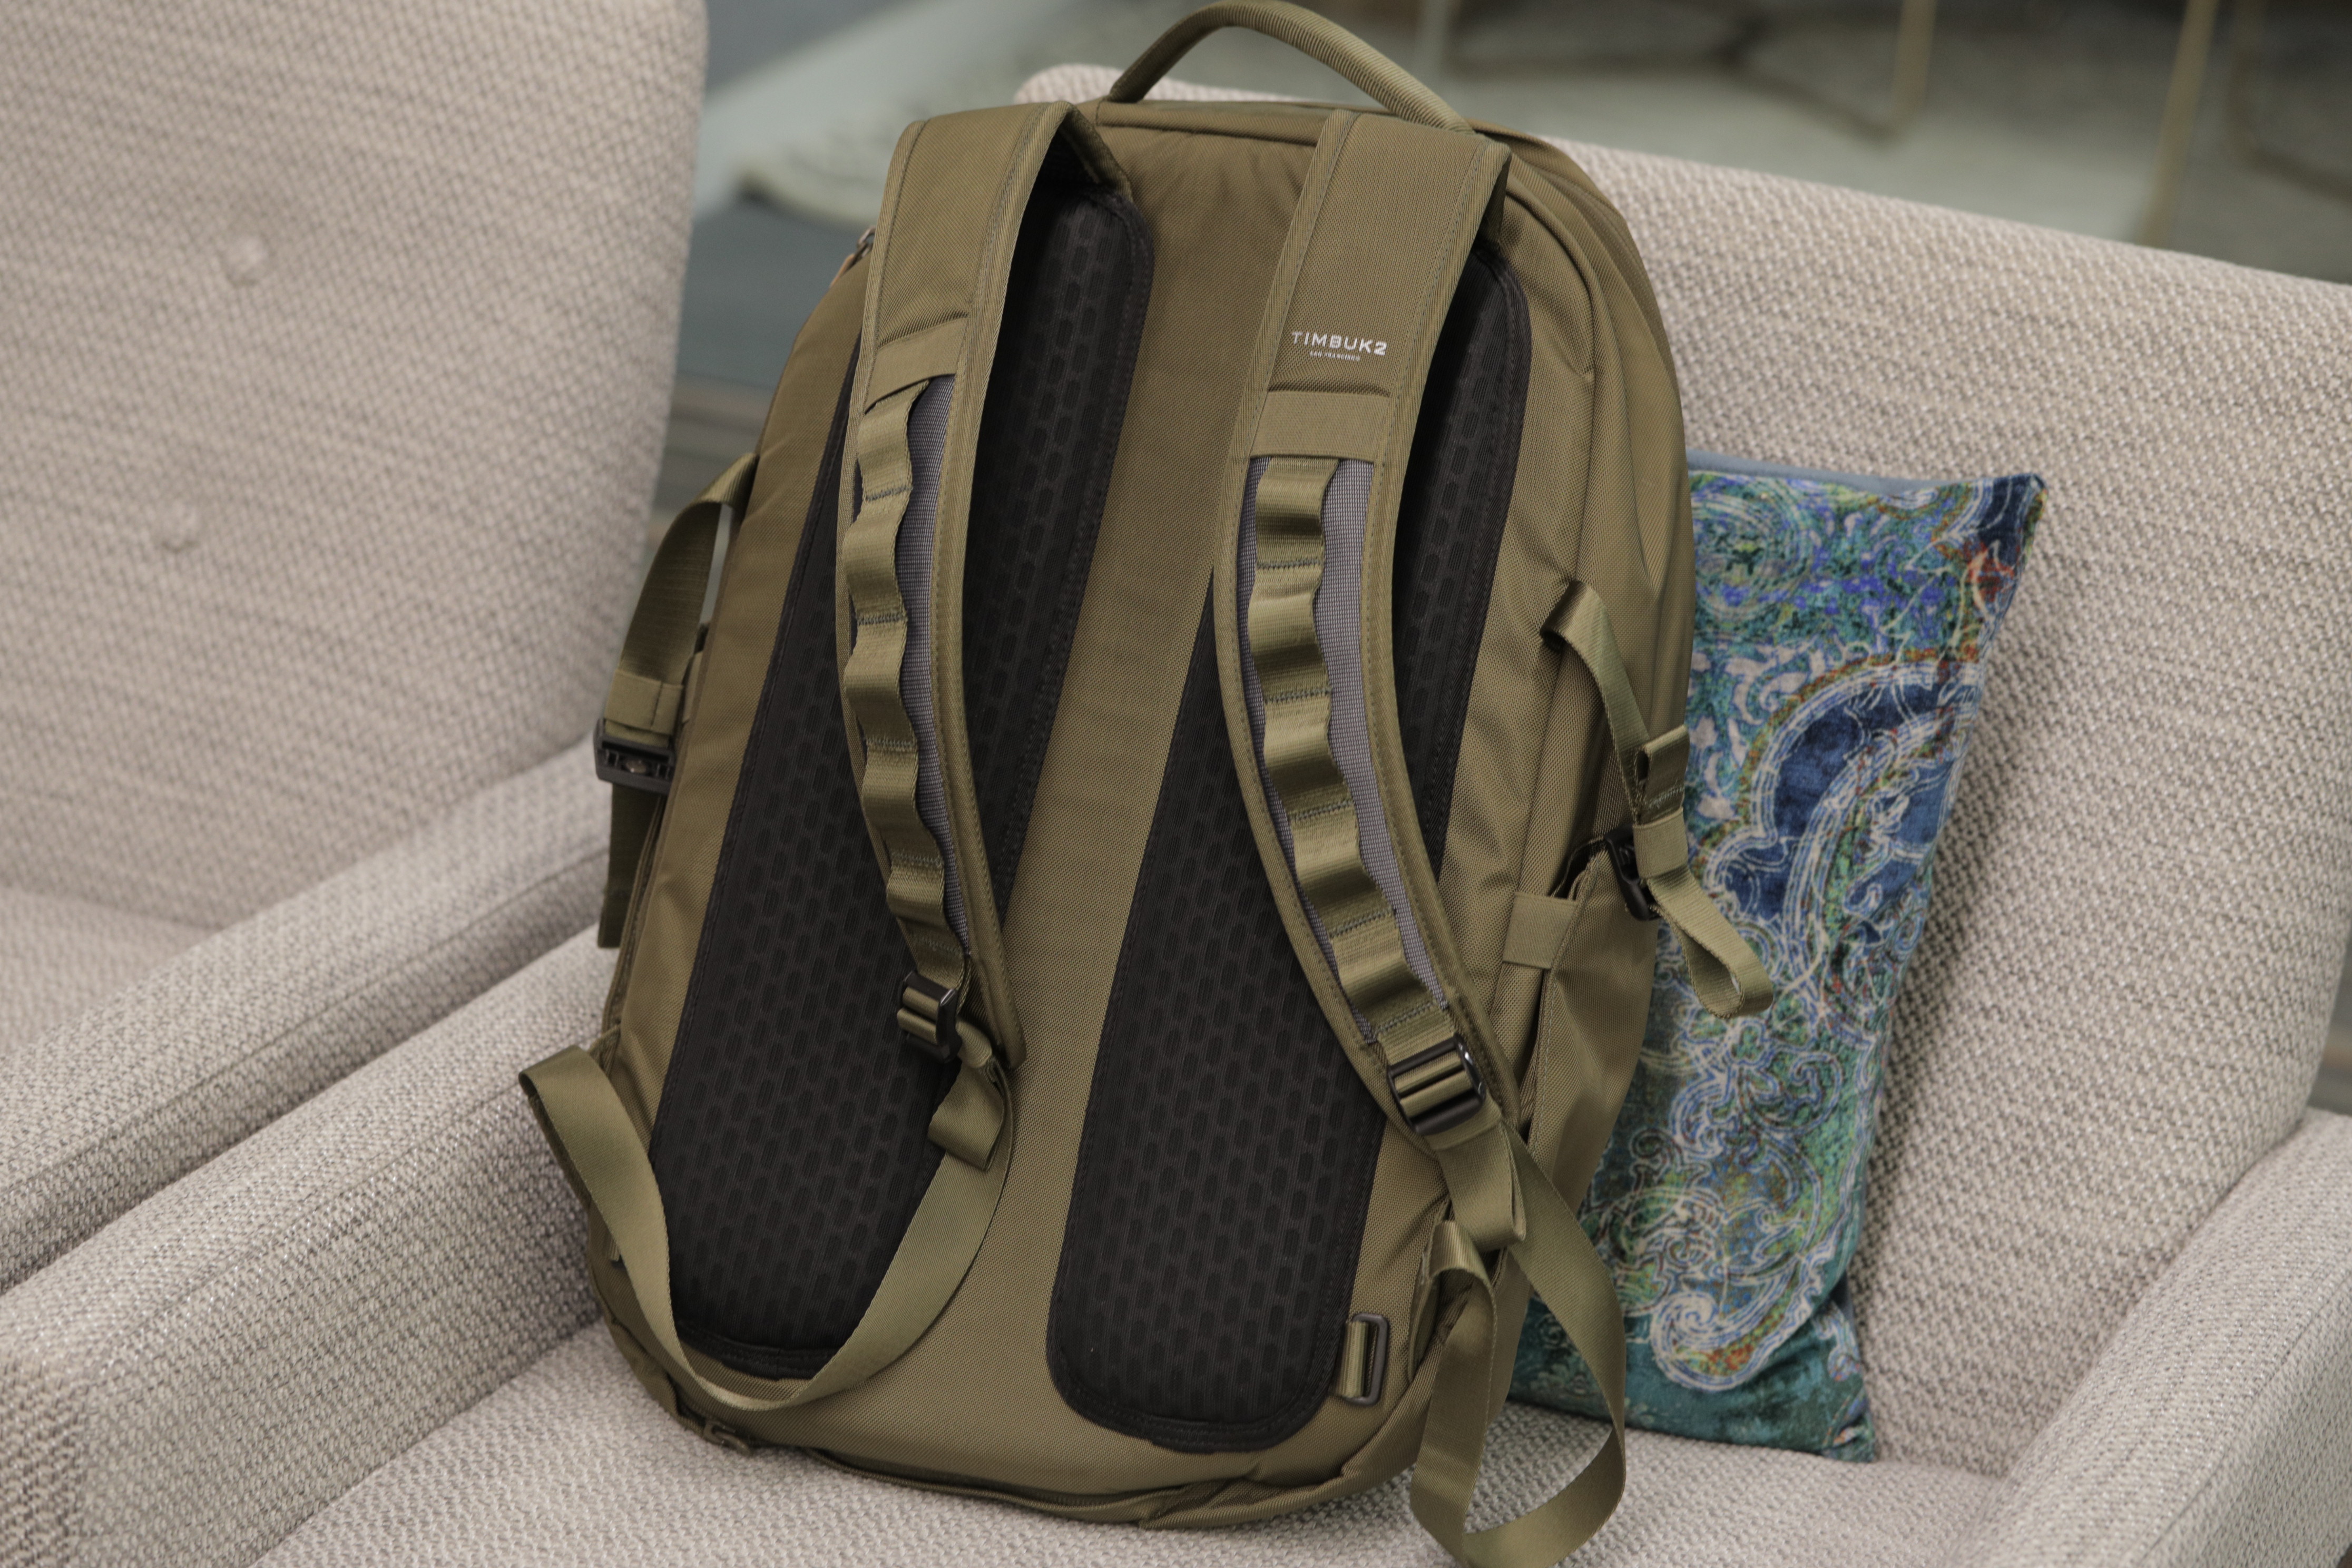 Timbuk2 S Parker Is A Commuter Backpack Made For The Long Haul Pnu